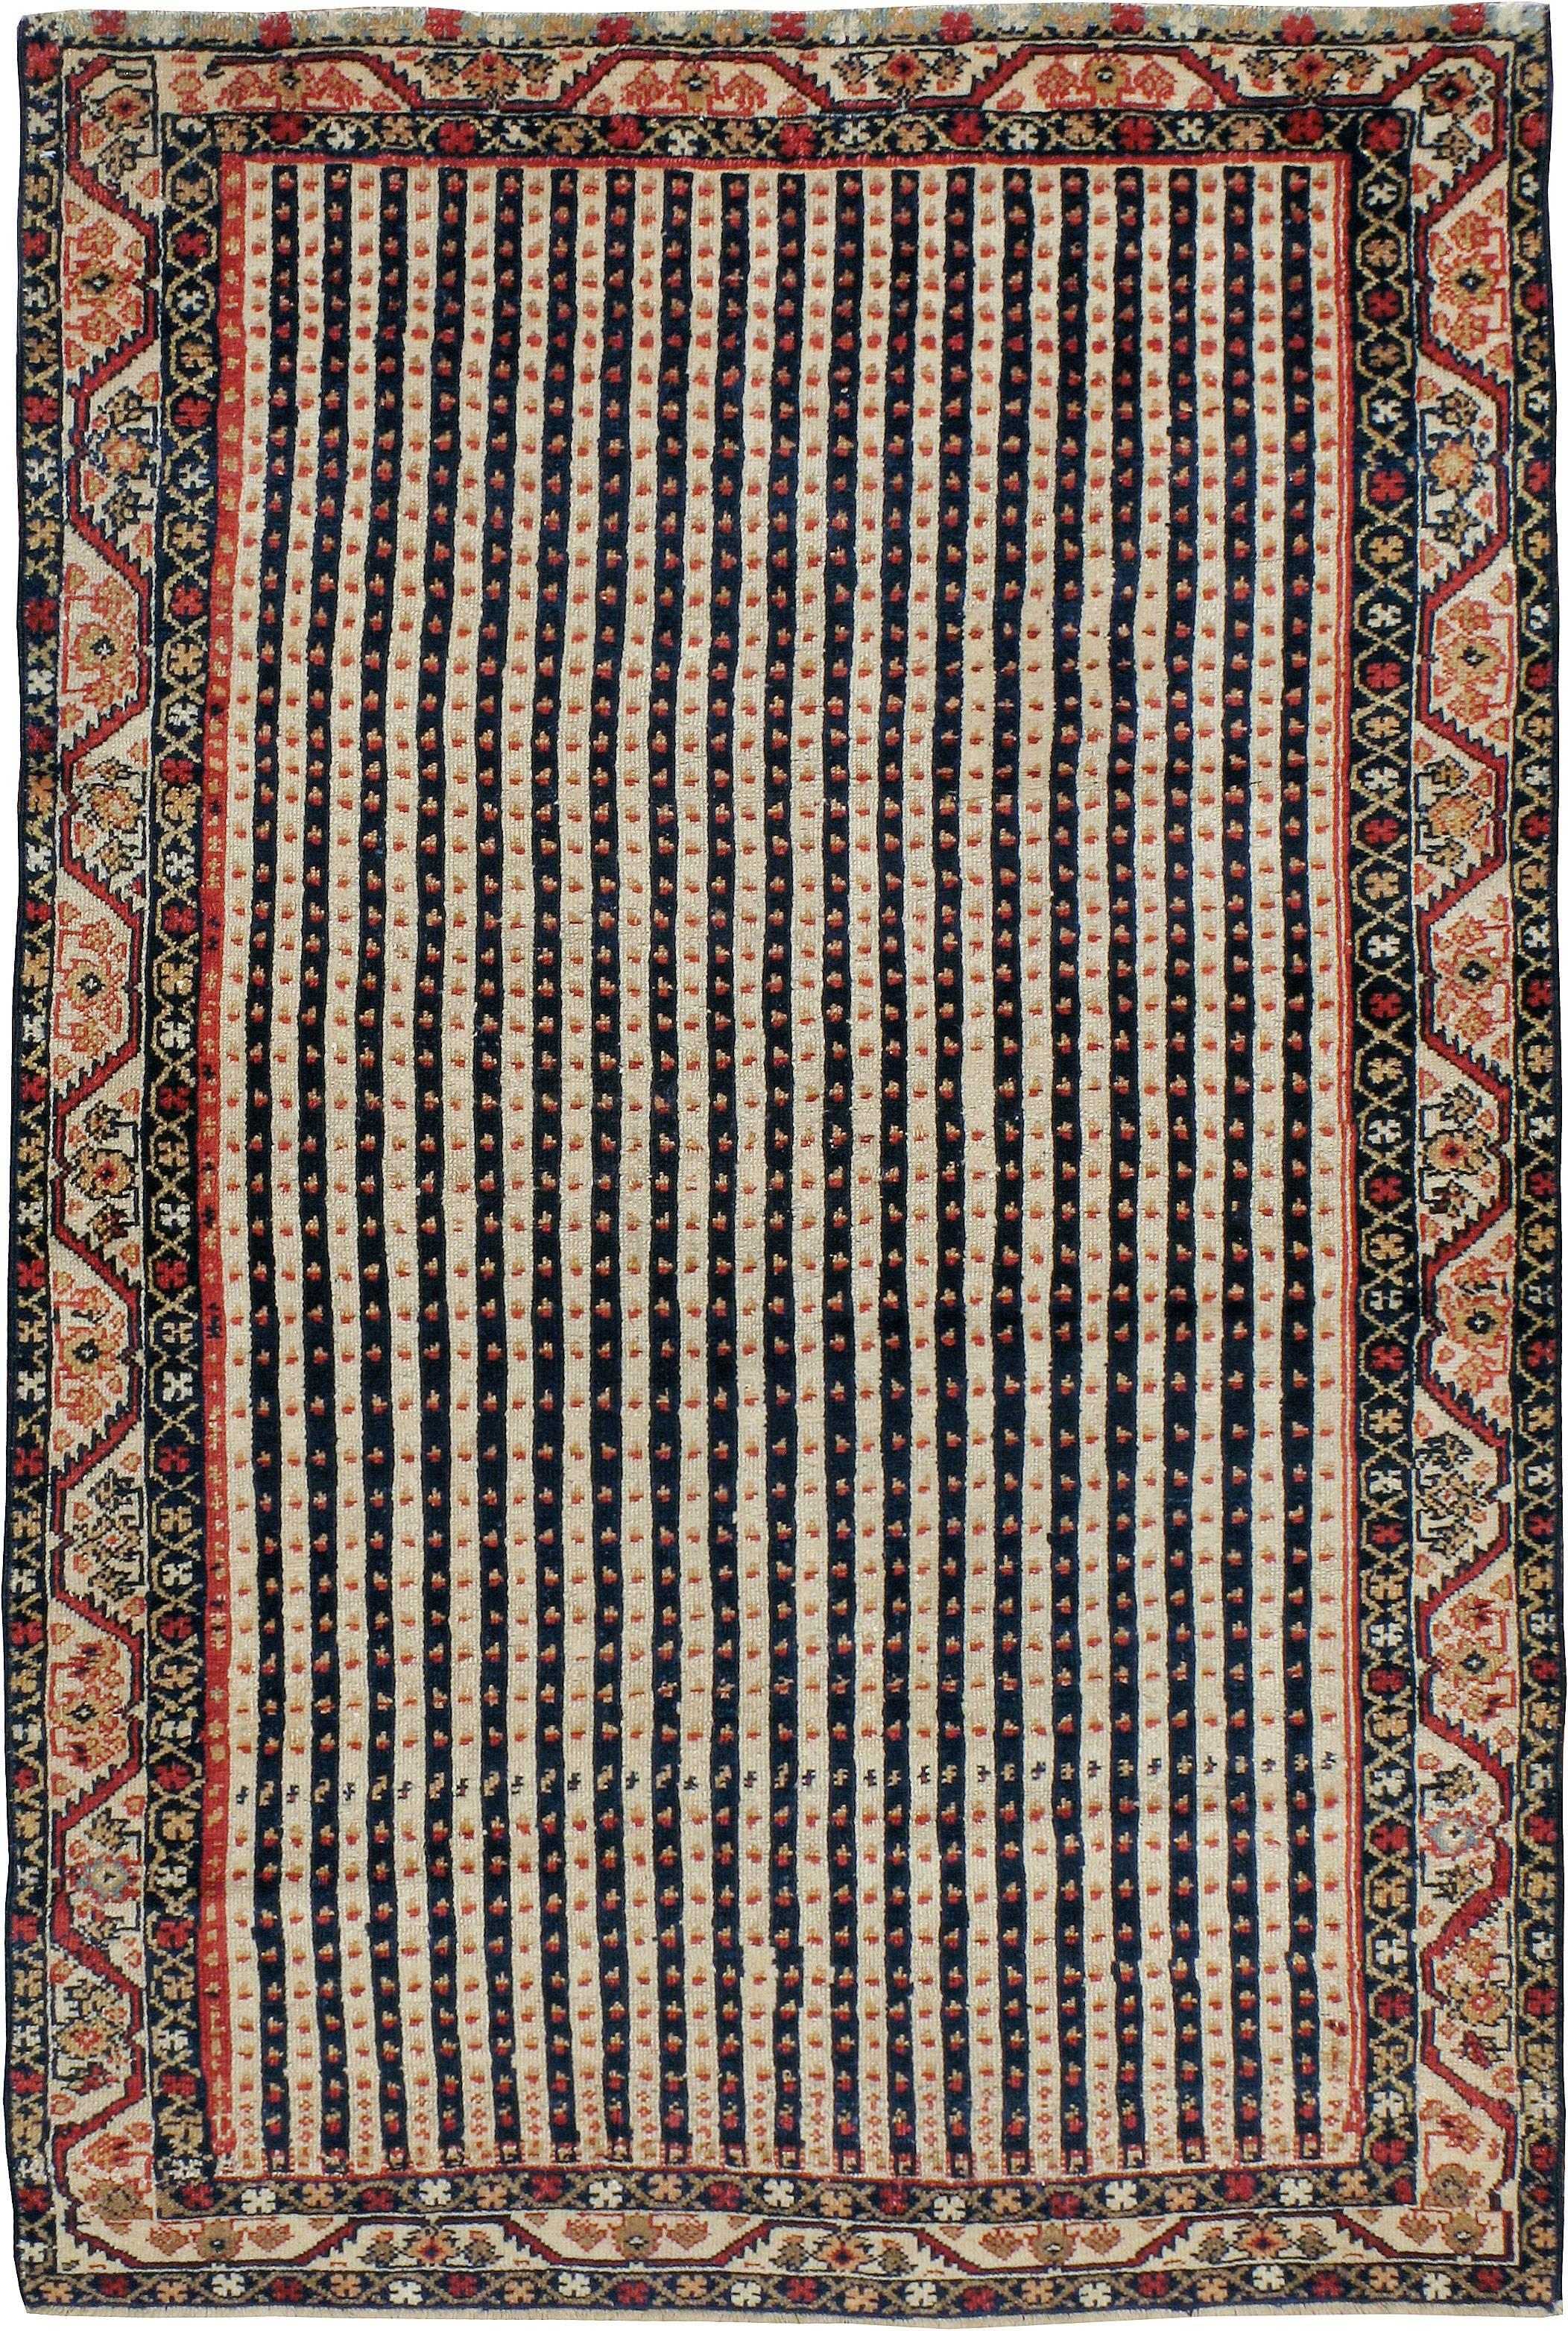 An antique Persian North West carpet from the first quarter of the 20th century.